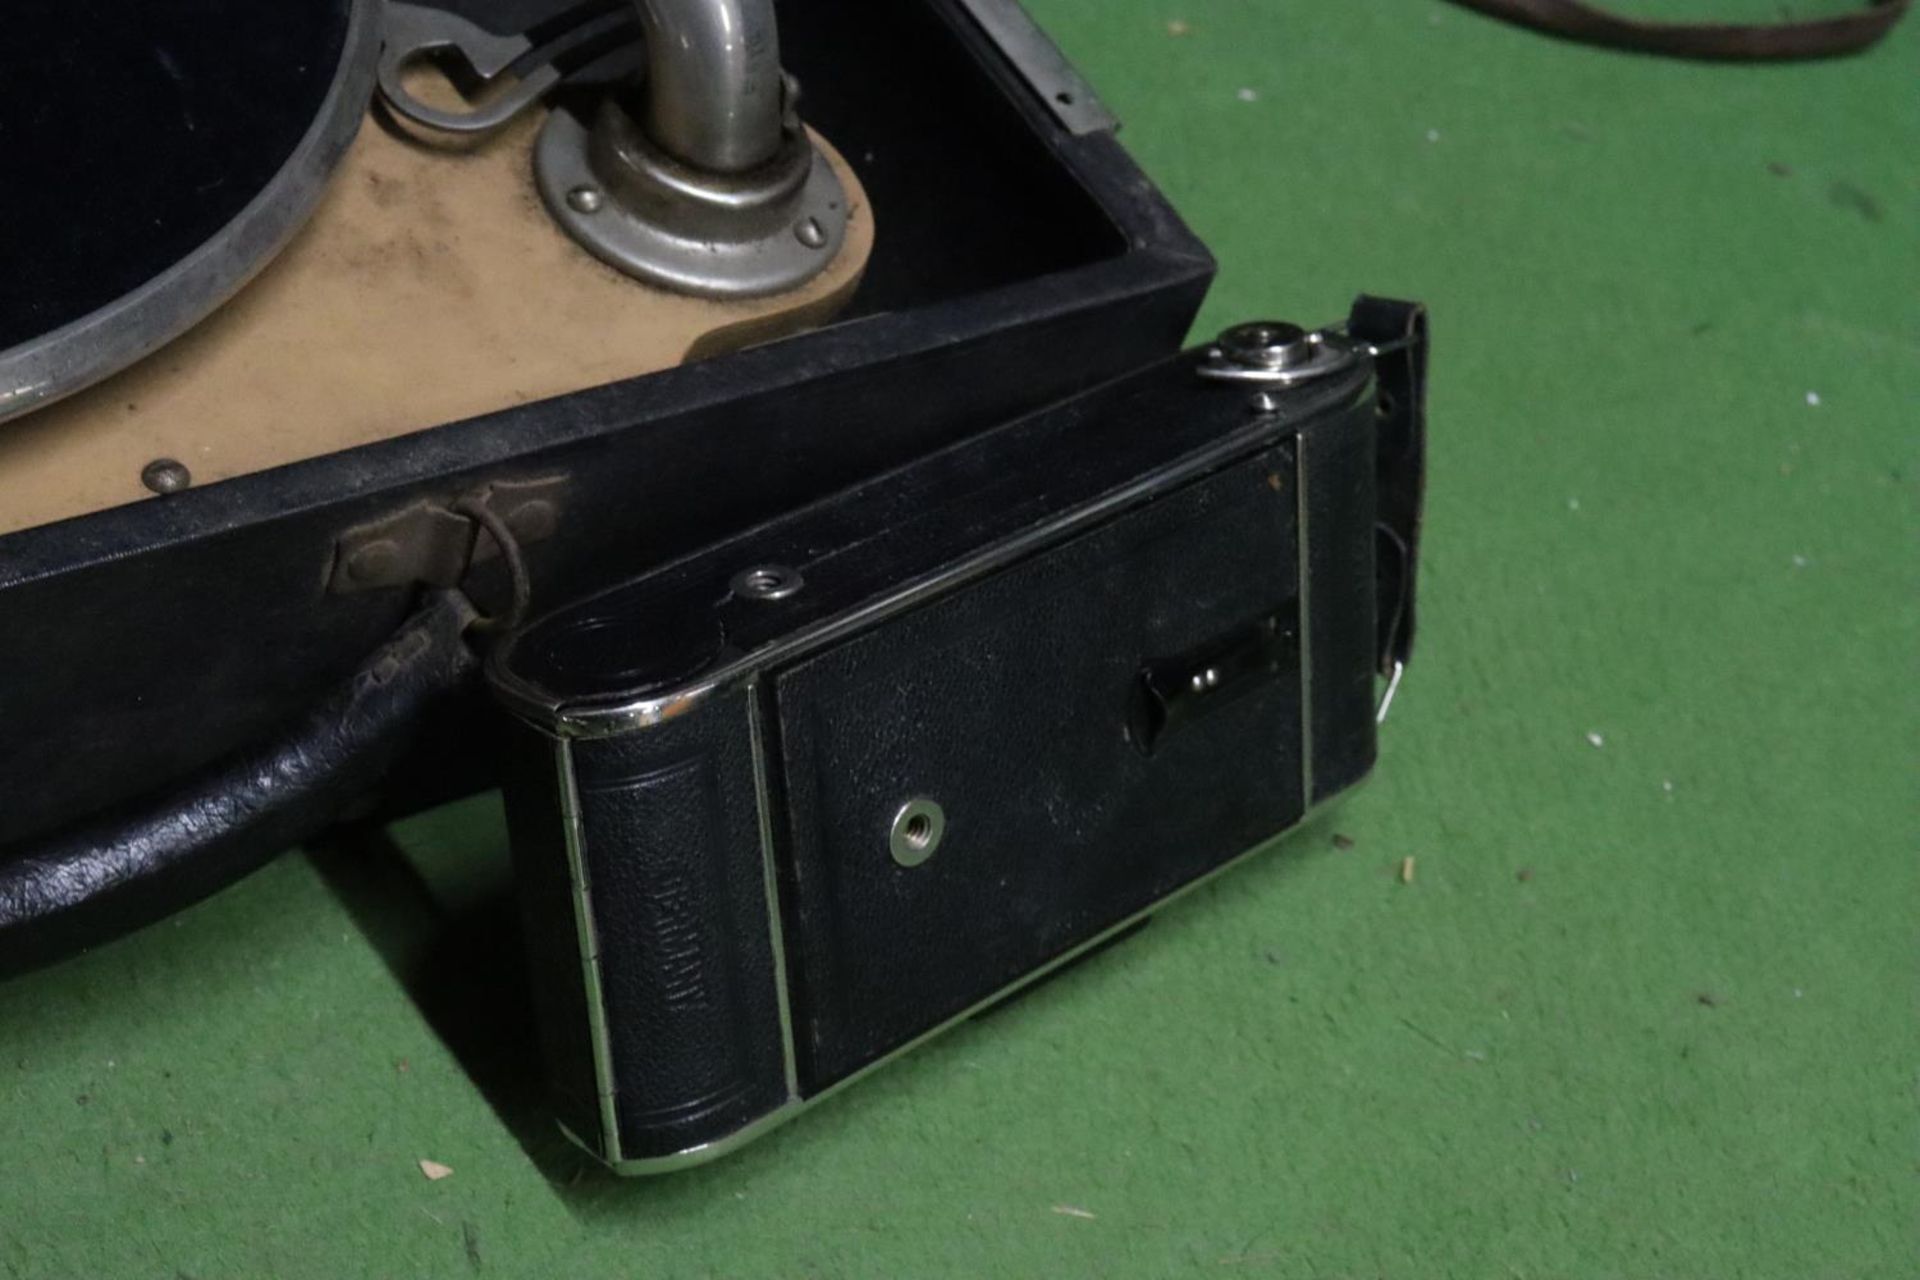 A VINTAGE DECCA SALON GRAMOPHONE PLAYER PLUS TWO VINTAGE CAMERAS IN CASES - Image 6 of 8